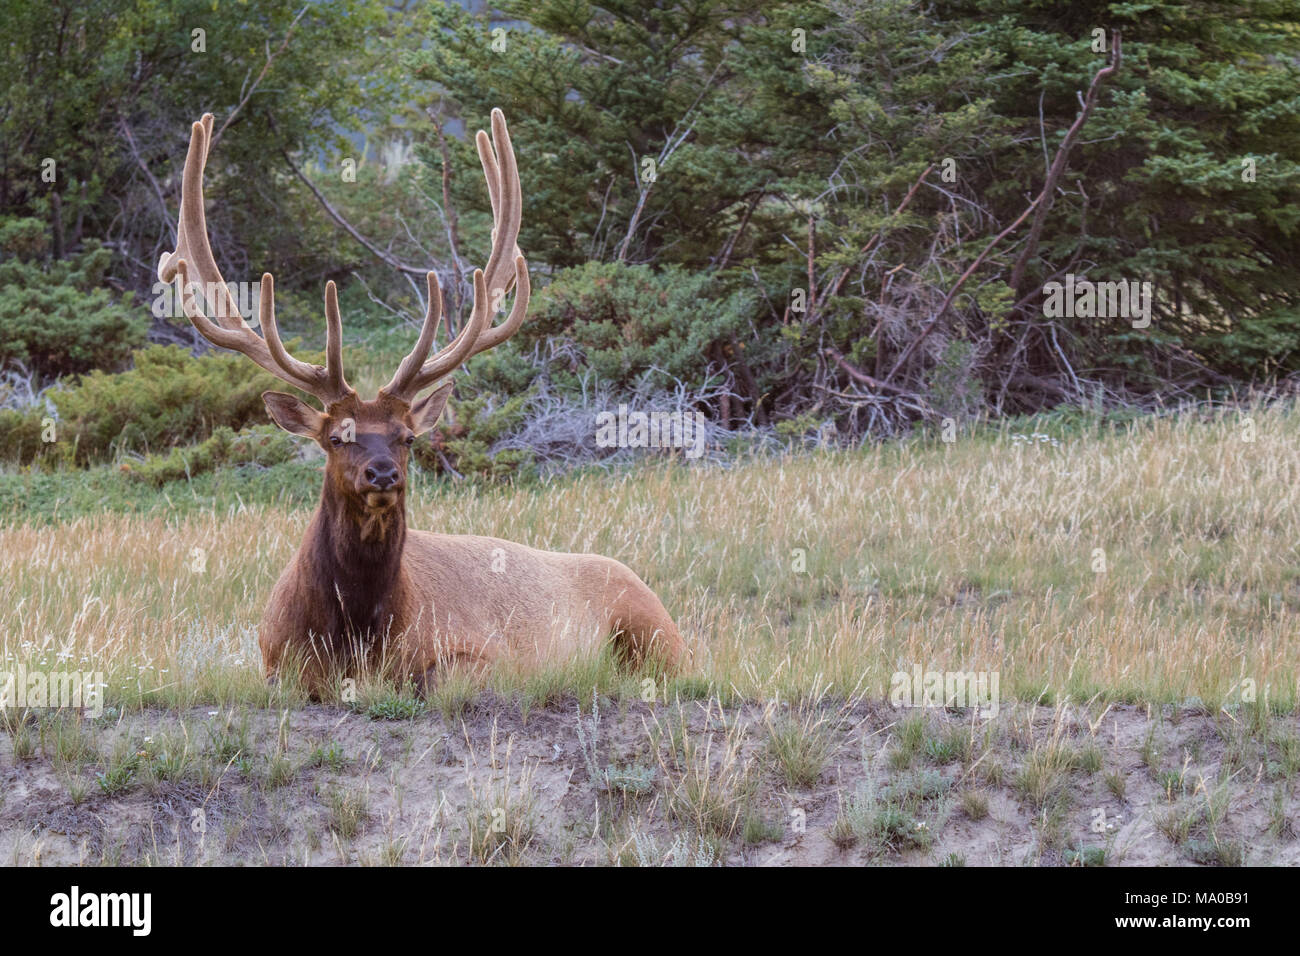 Bull elk with magnificent rack, resting amongst the wild grass in Banff national park, Alberta, Canada Stock Photo